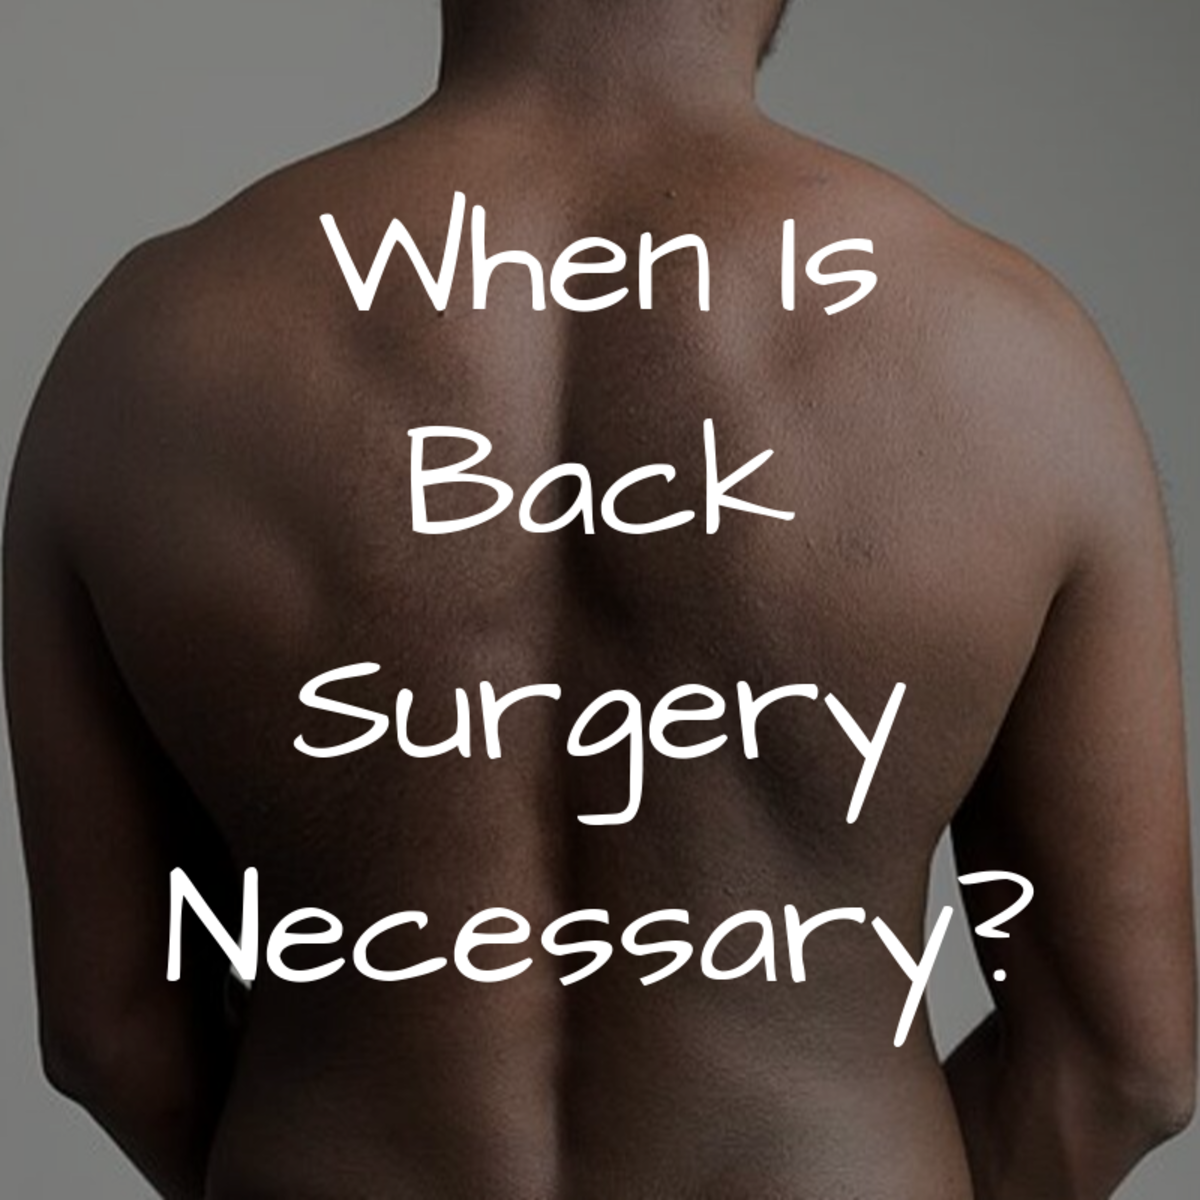 Is Surgery Necessary to Relieve Back Pain?